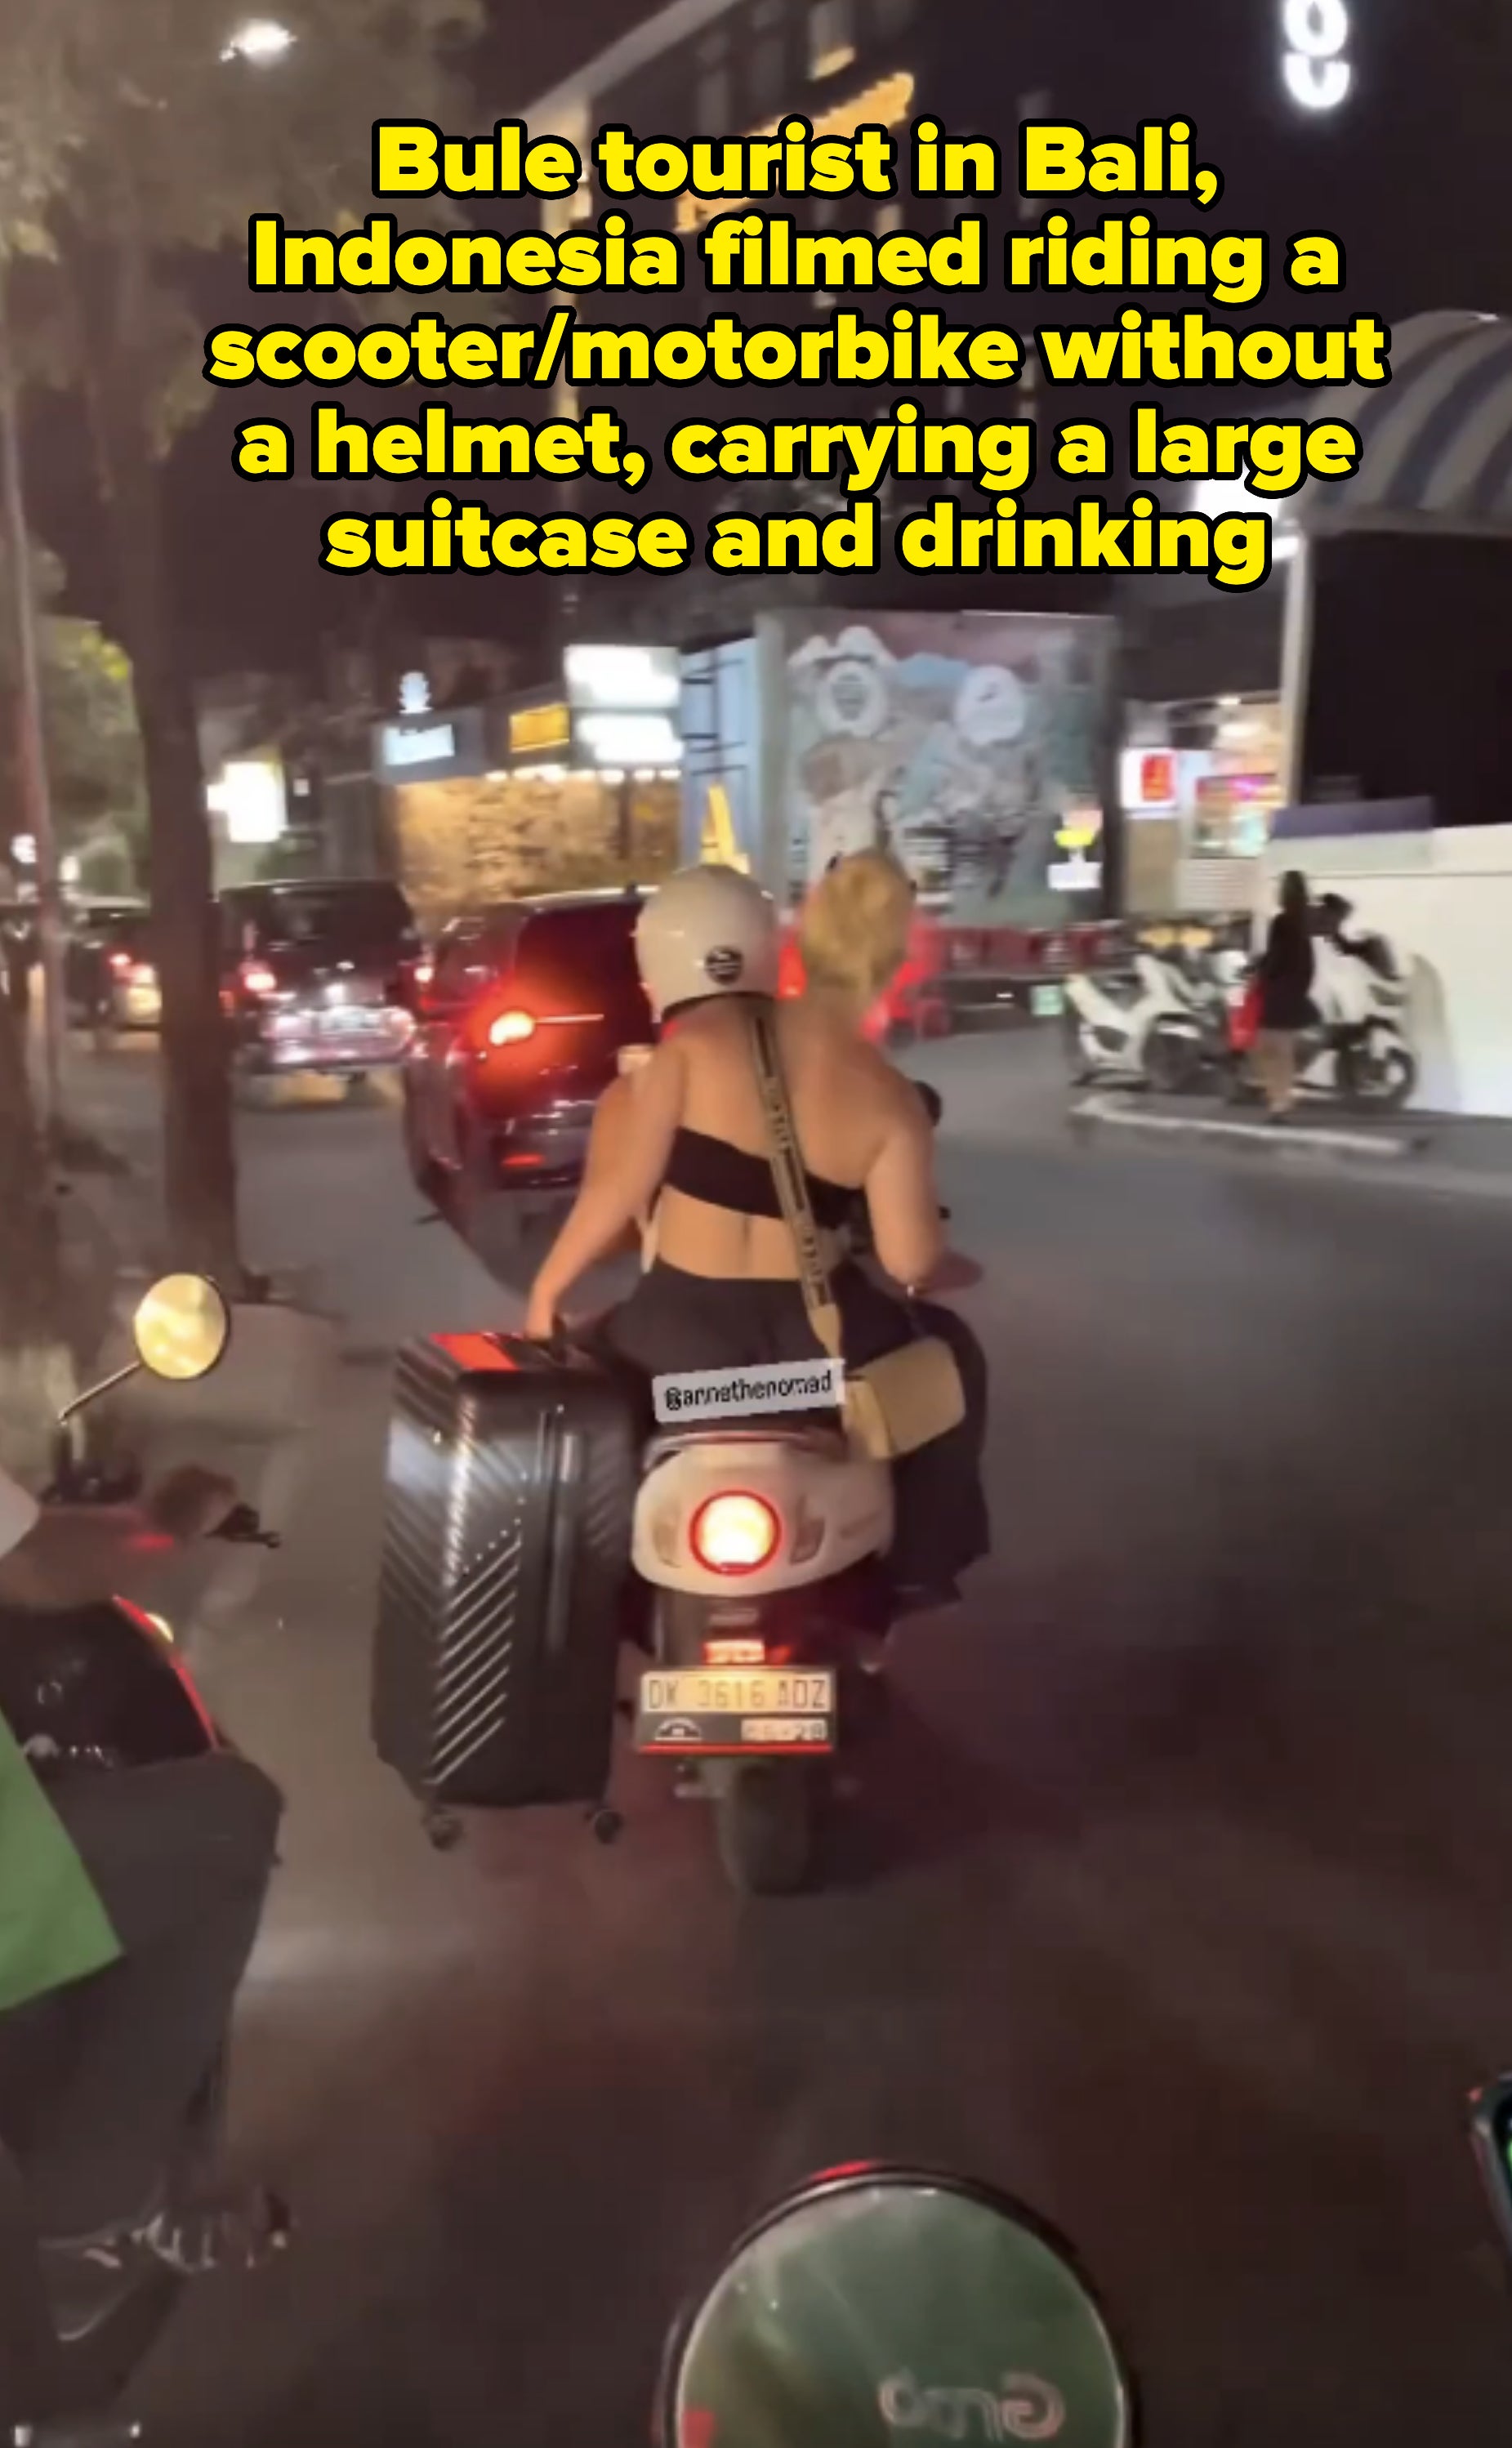 A woman on a motor scooter carries a large suitcase and a shoulder bag while riding through a busy city street at night